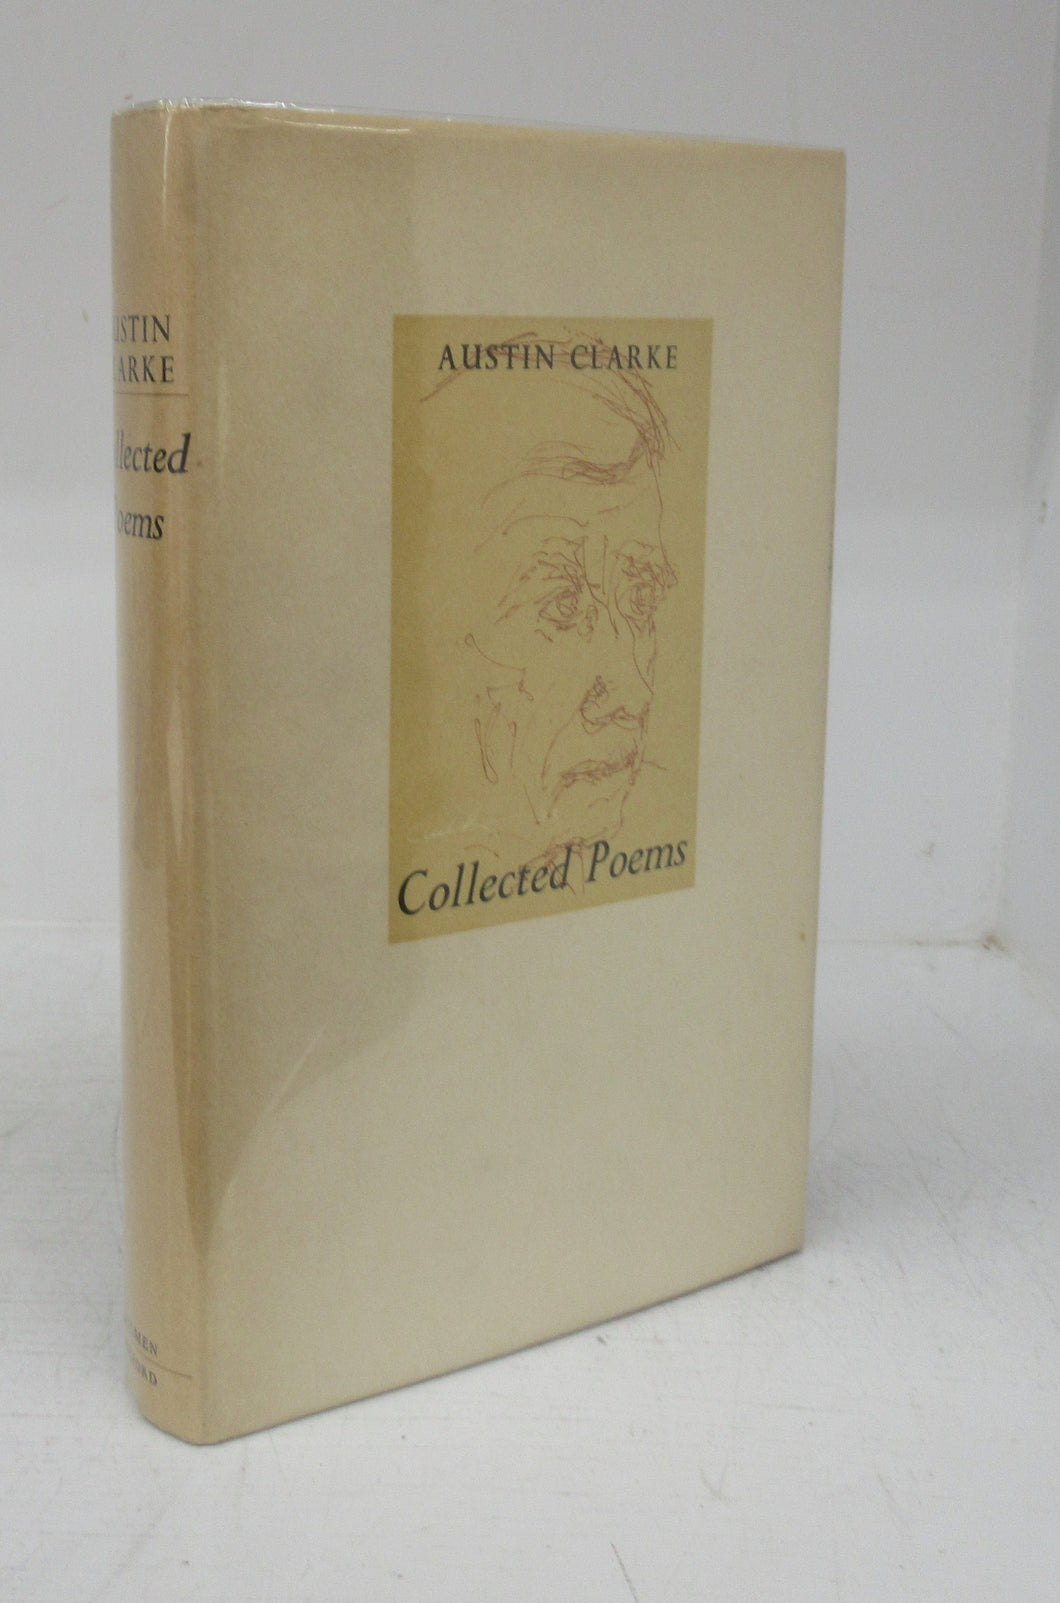 Austin Clarke: Collected Poems